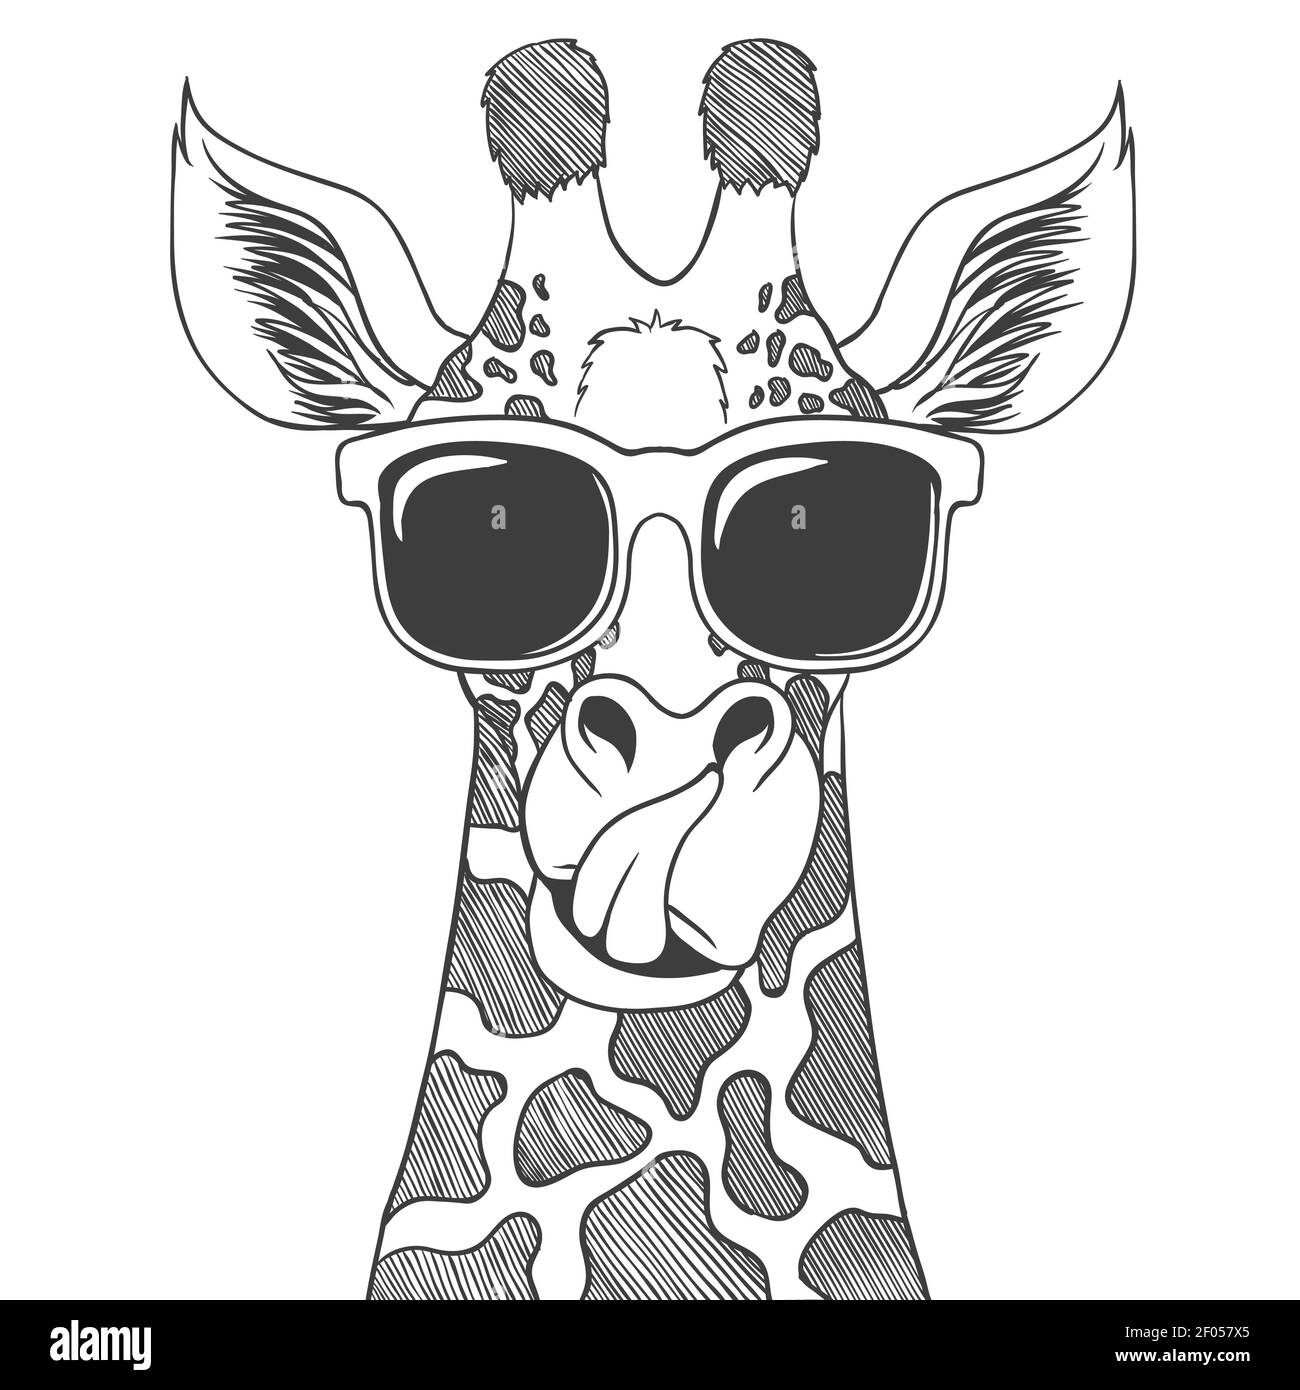 Giraffe wearing eyeglasses hand drawn vector illustration for your company or brand Stock Vector